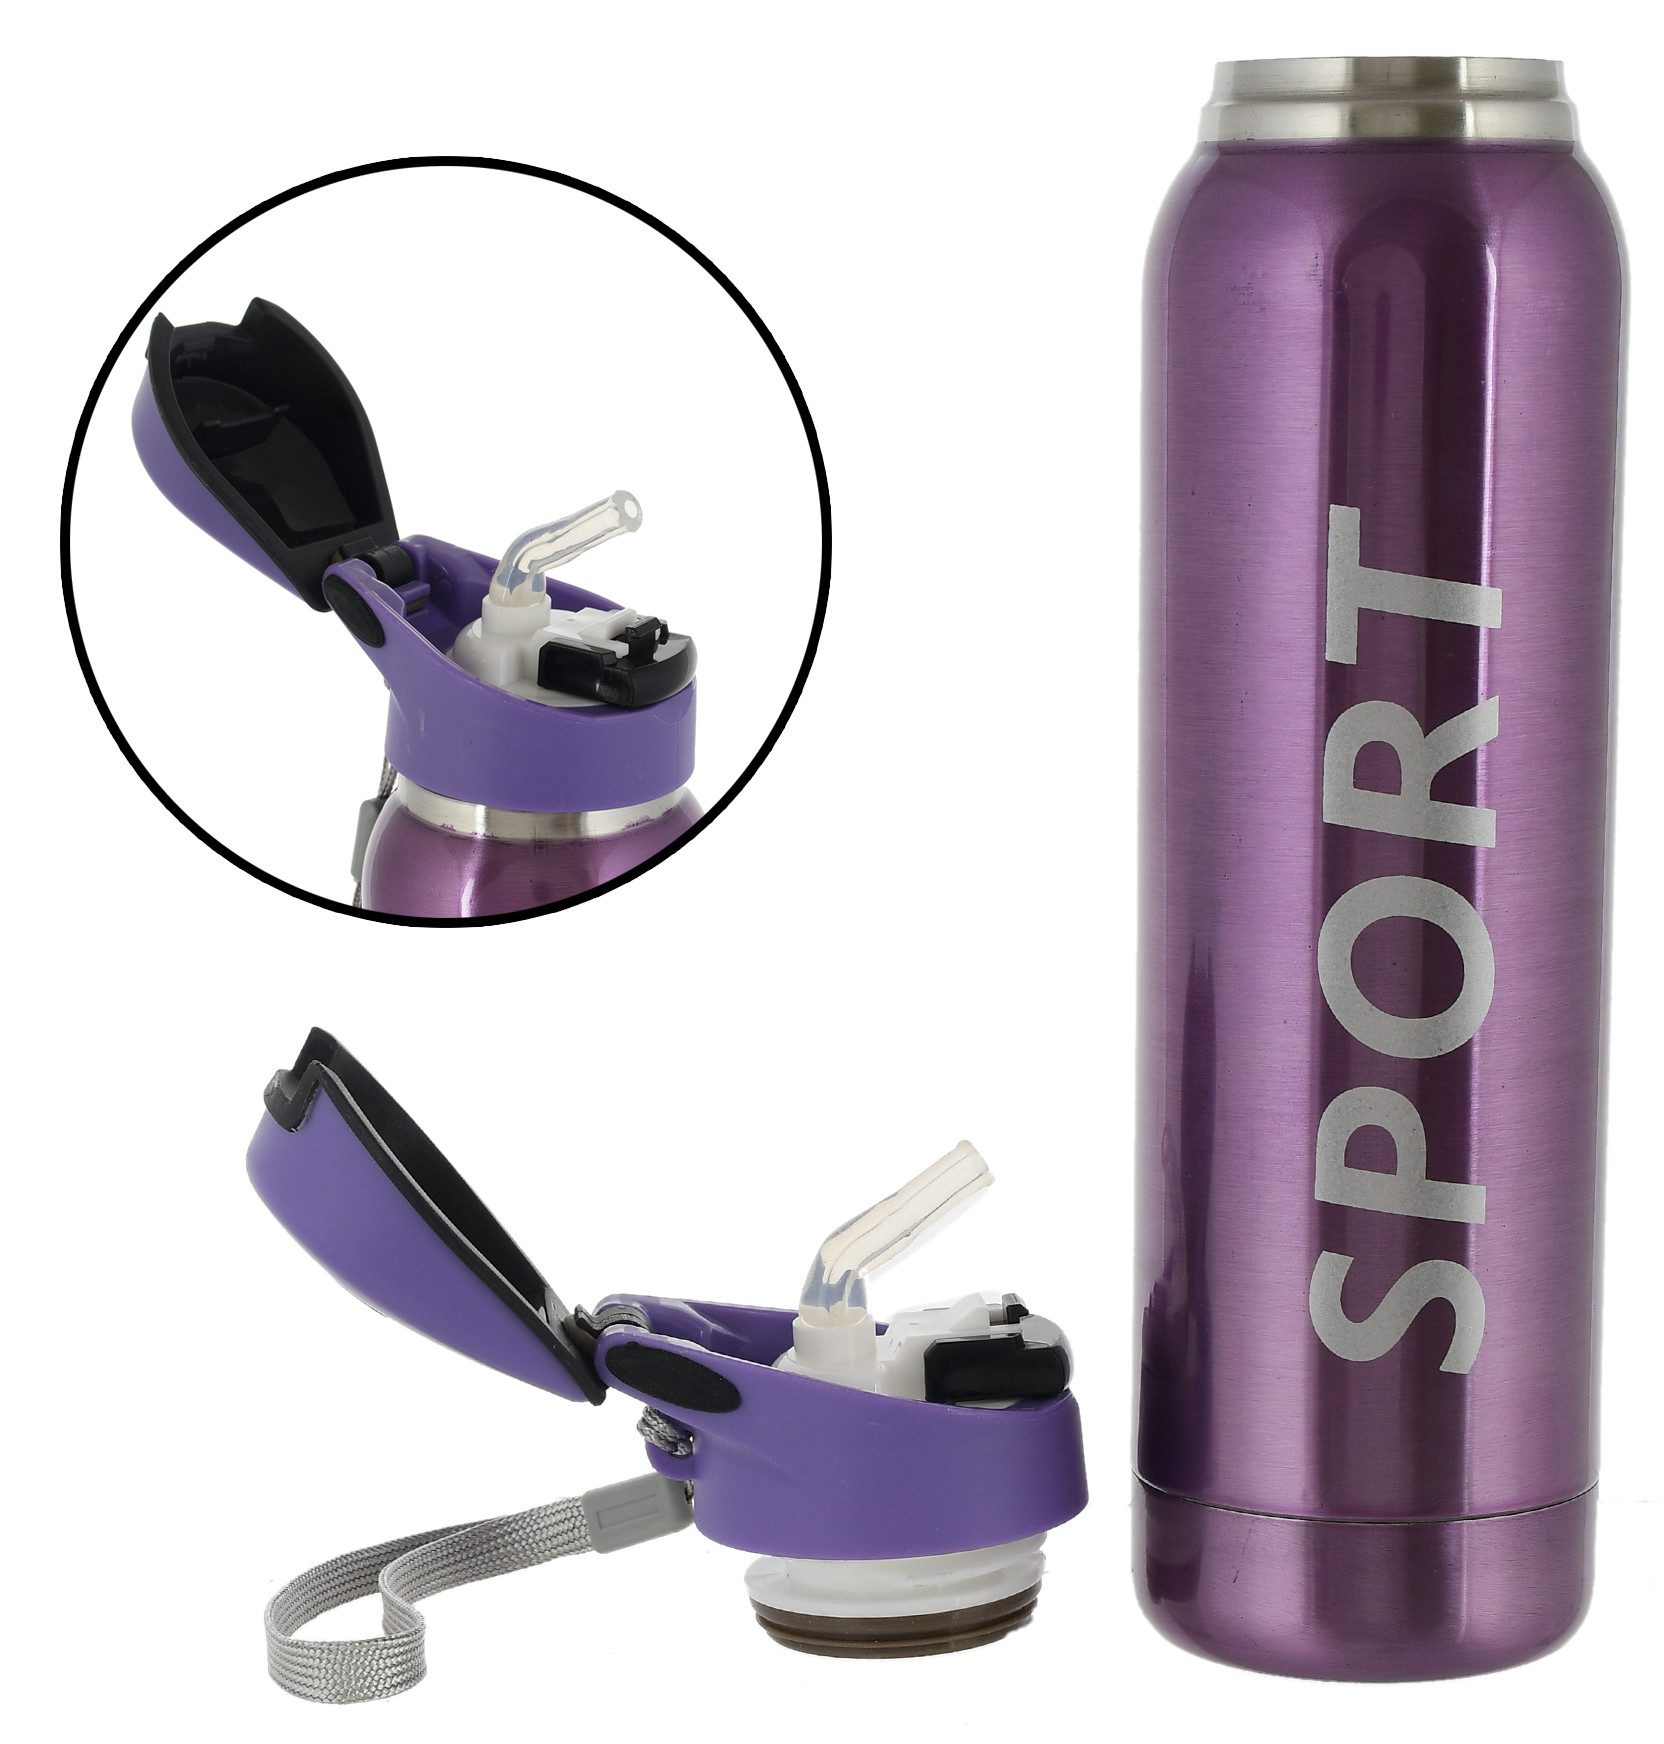 Kuber Industries Stainless Steel BPA Free Drinking Bottle, Hot & Cold Bottle, Ideal for Sports, Bike, Running, Hiking With Sipper & Push Button on Lid, 500ml (Pruple)-HS_38_KUBMART21735